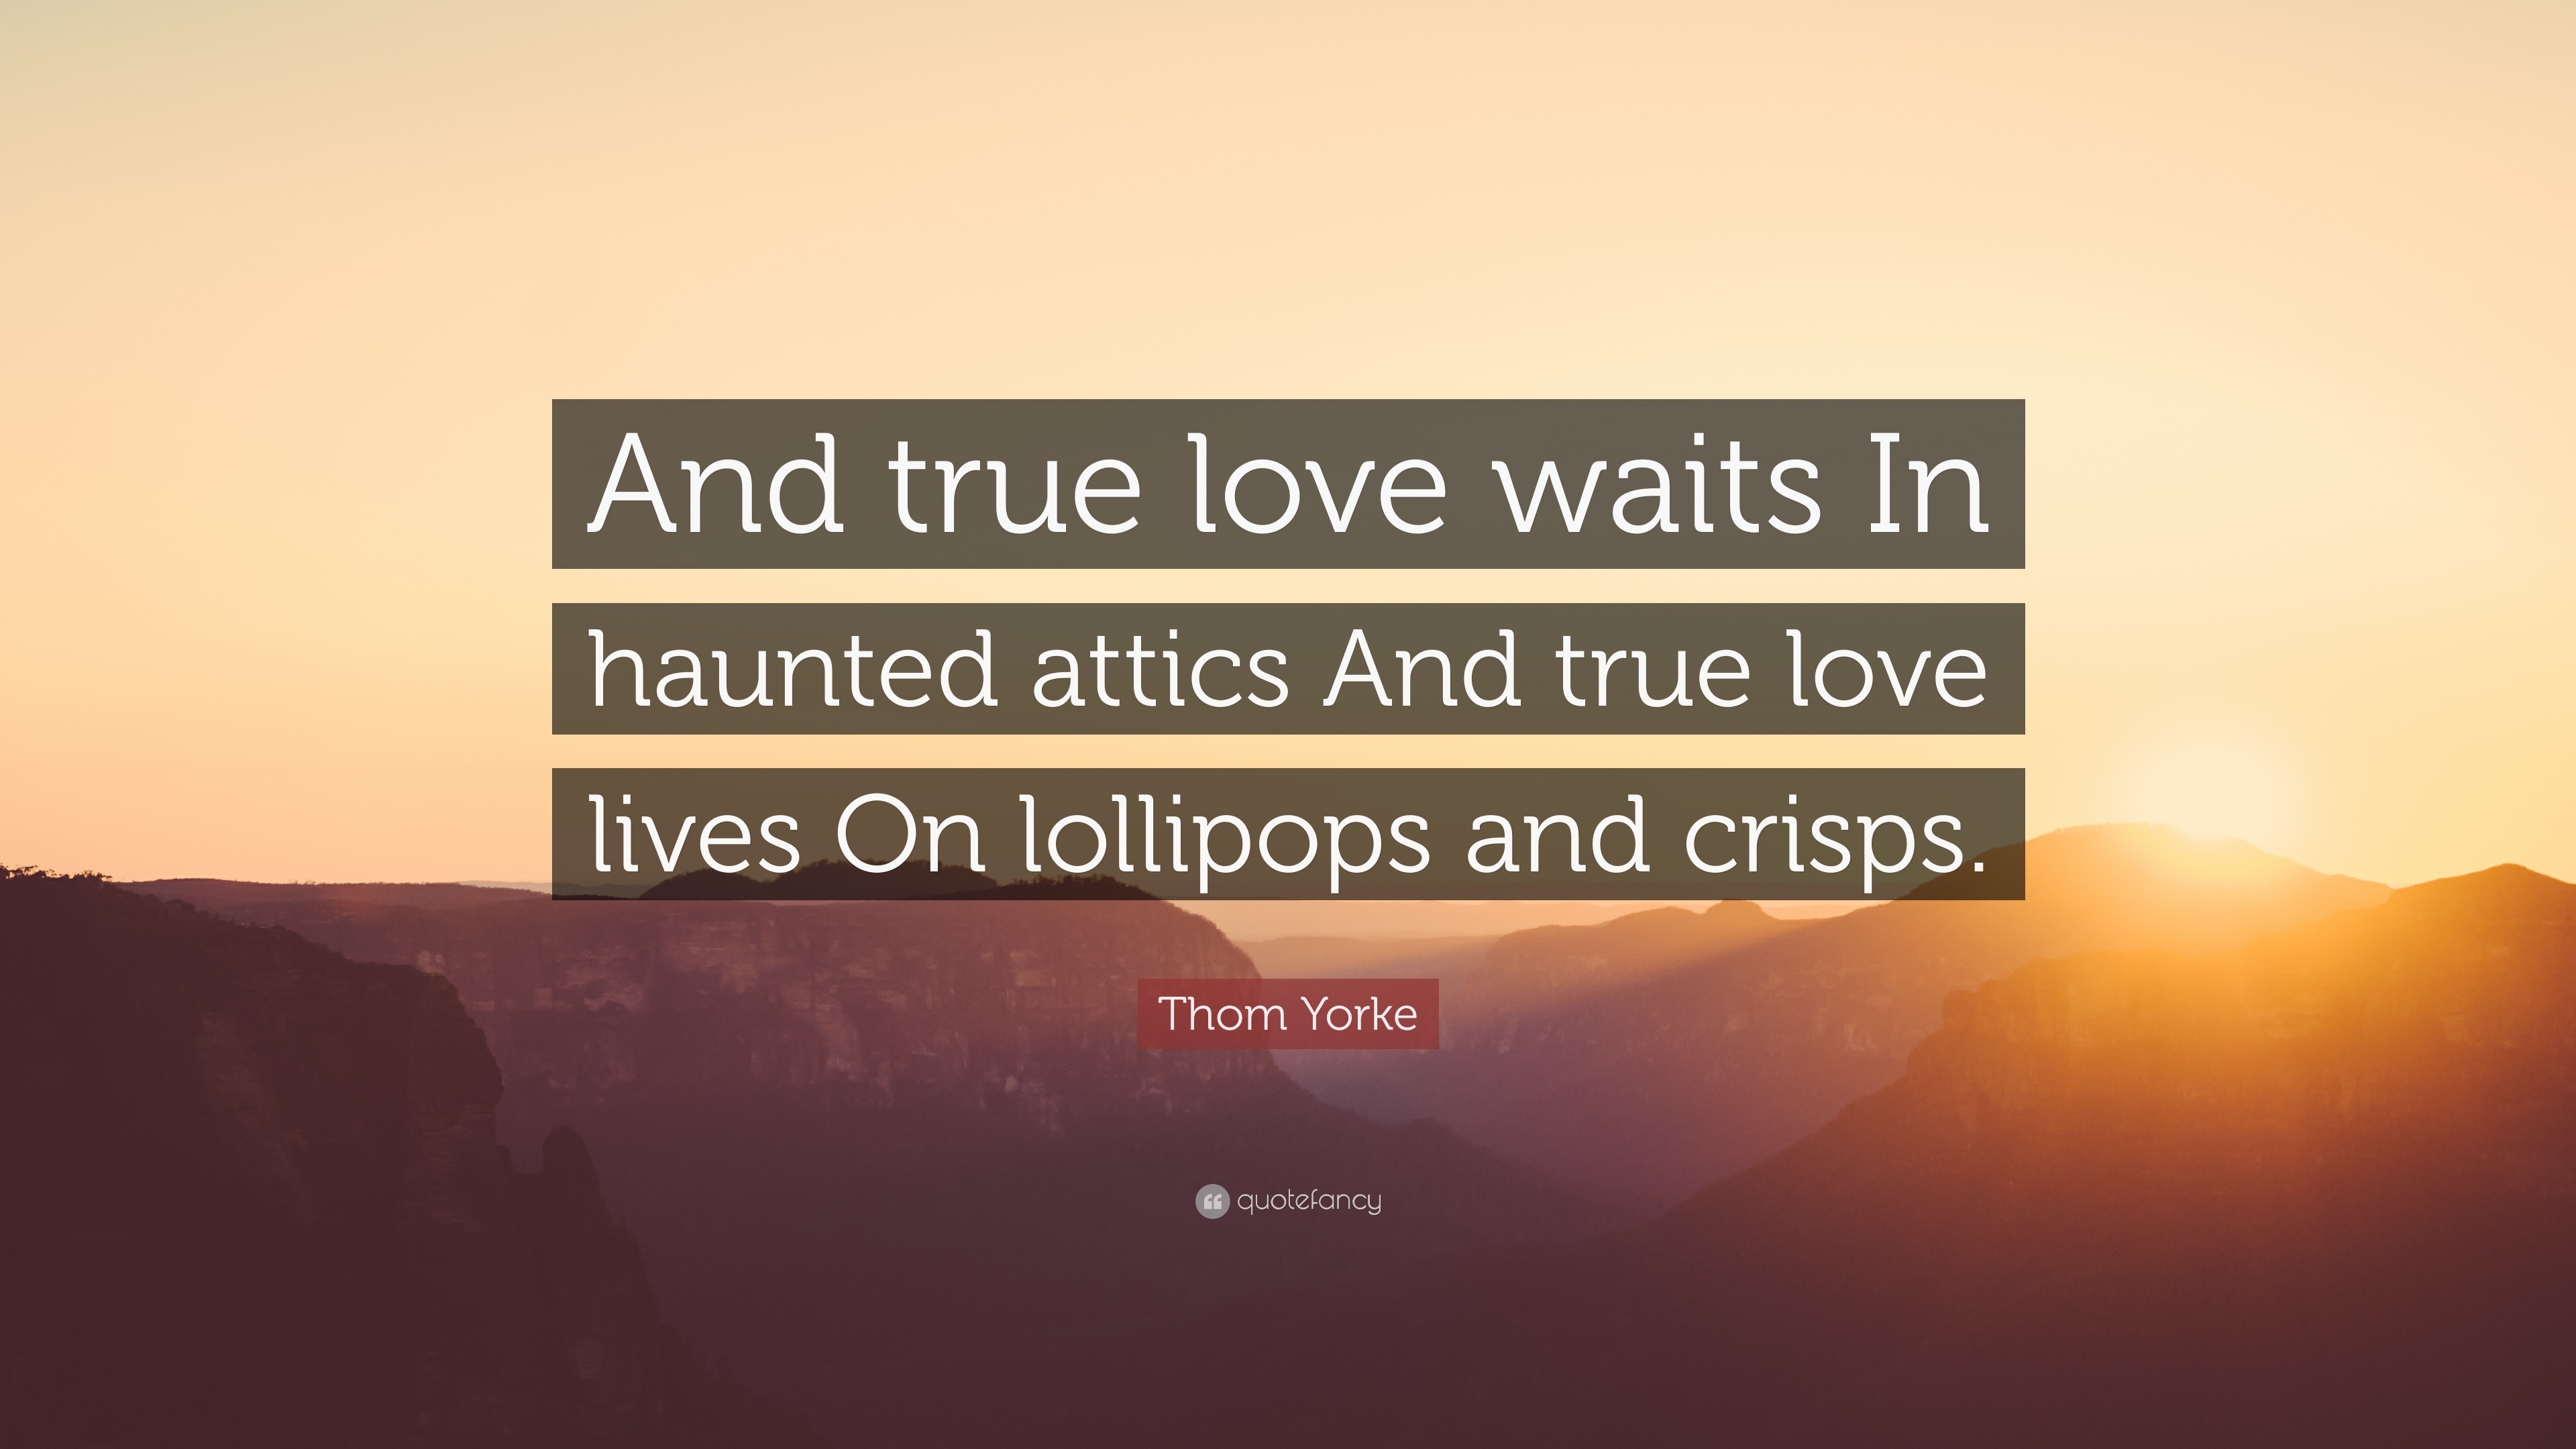 Thom Yorke Quote “And true love waits In haunted attics And true love lives